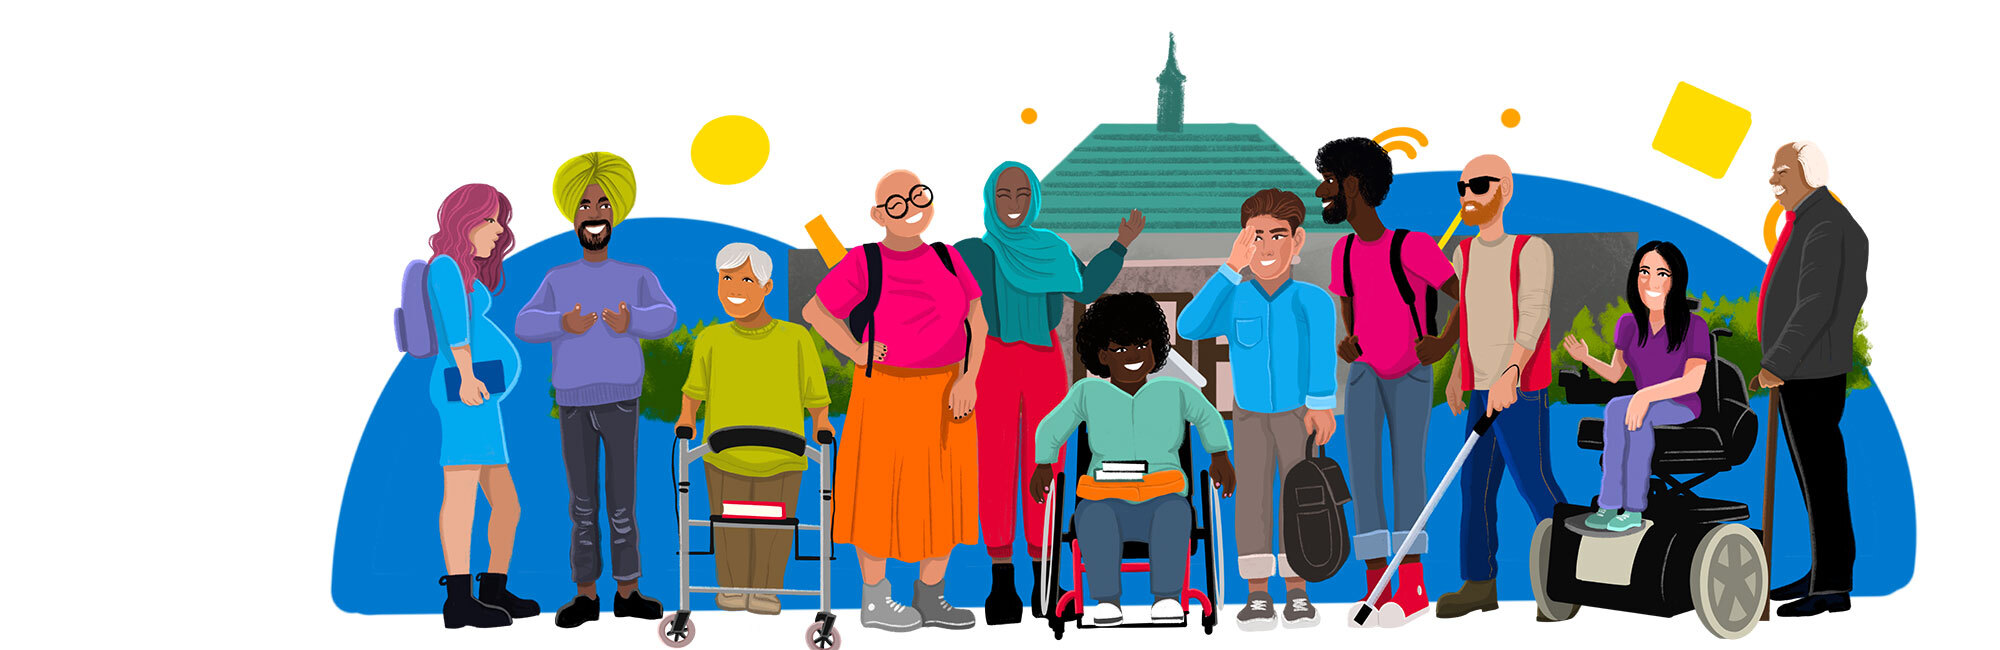 A diverse group of people with varying disabilities.